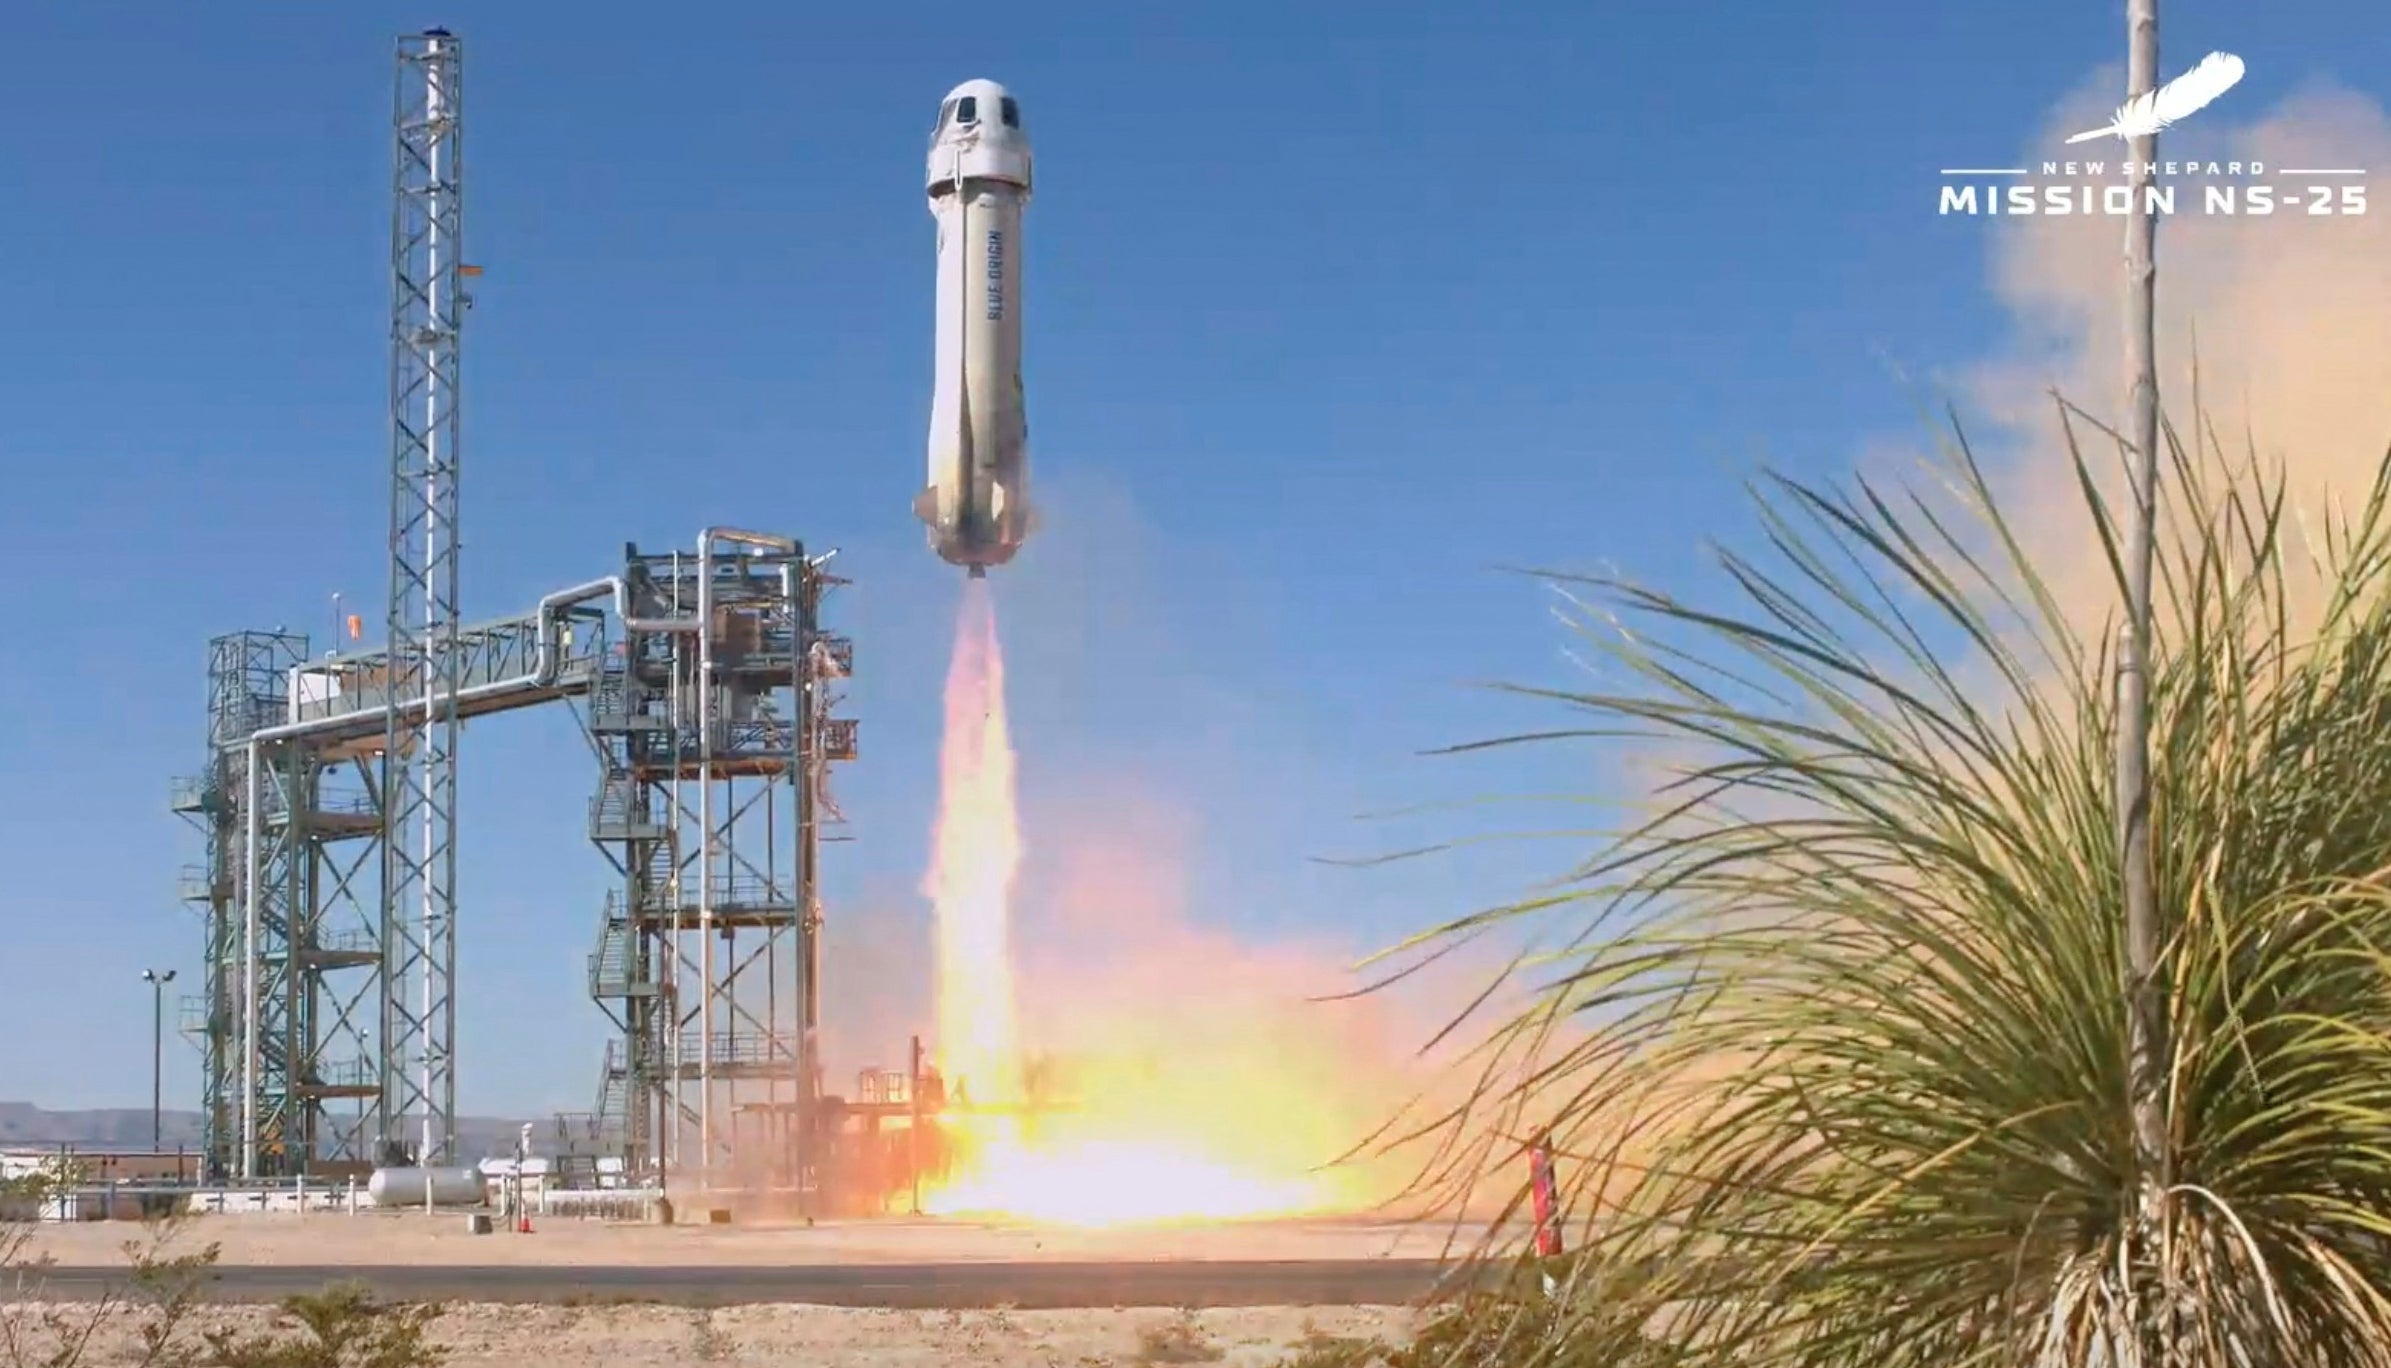 A Blue Origin rocket takes off on 19 May with six passengers inside, including Ed Dwight, the first Black man to train as an astronaut